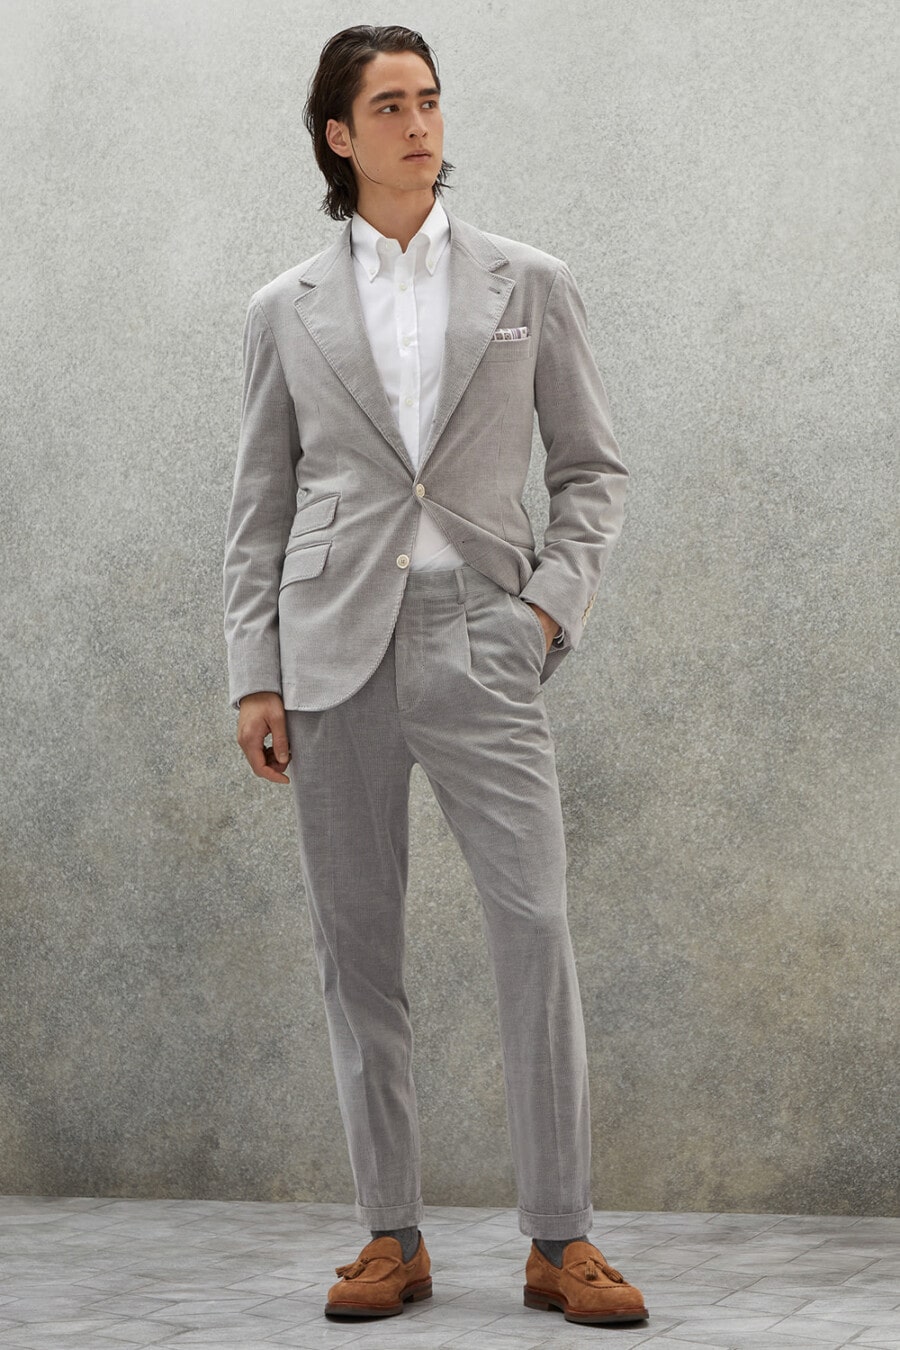 Men's grey corduroy suit, white shirt, charcoal socks and tan suede tassel loafers outfit